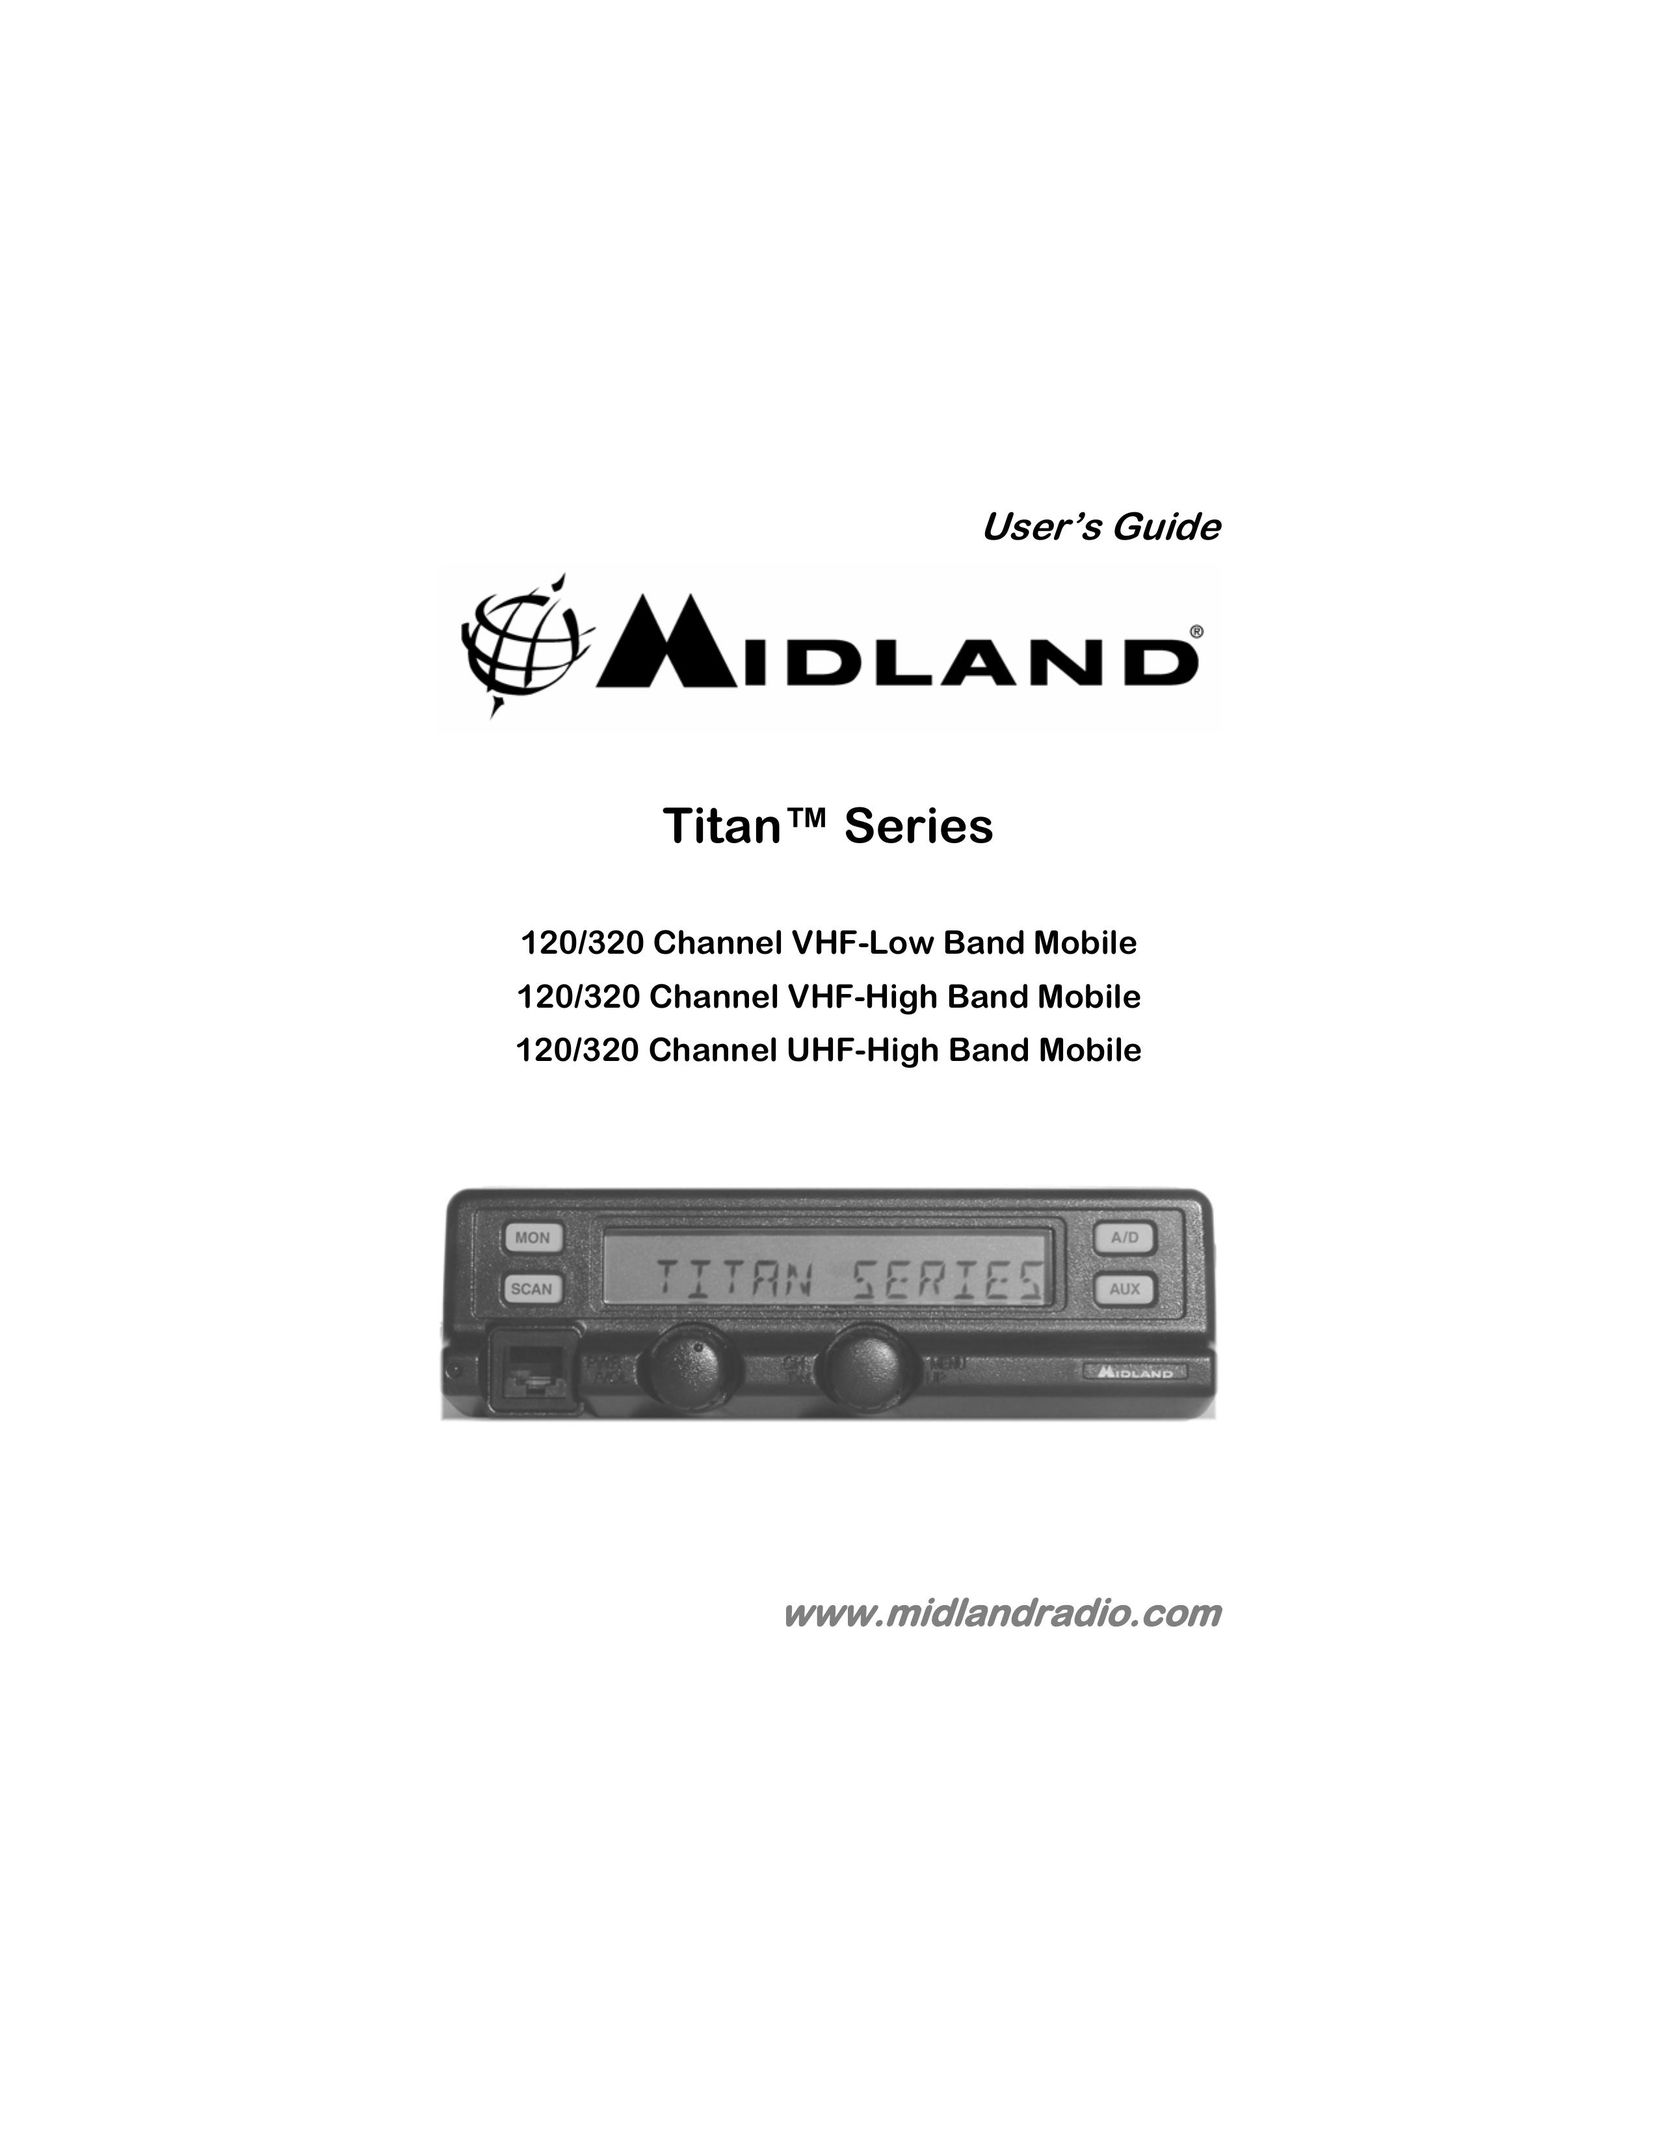 Midland Radio 120/320 CHANNEL VHF-HIGH BAND MOBILE Car Stereo System User Manual